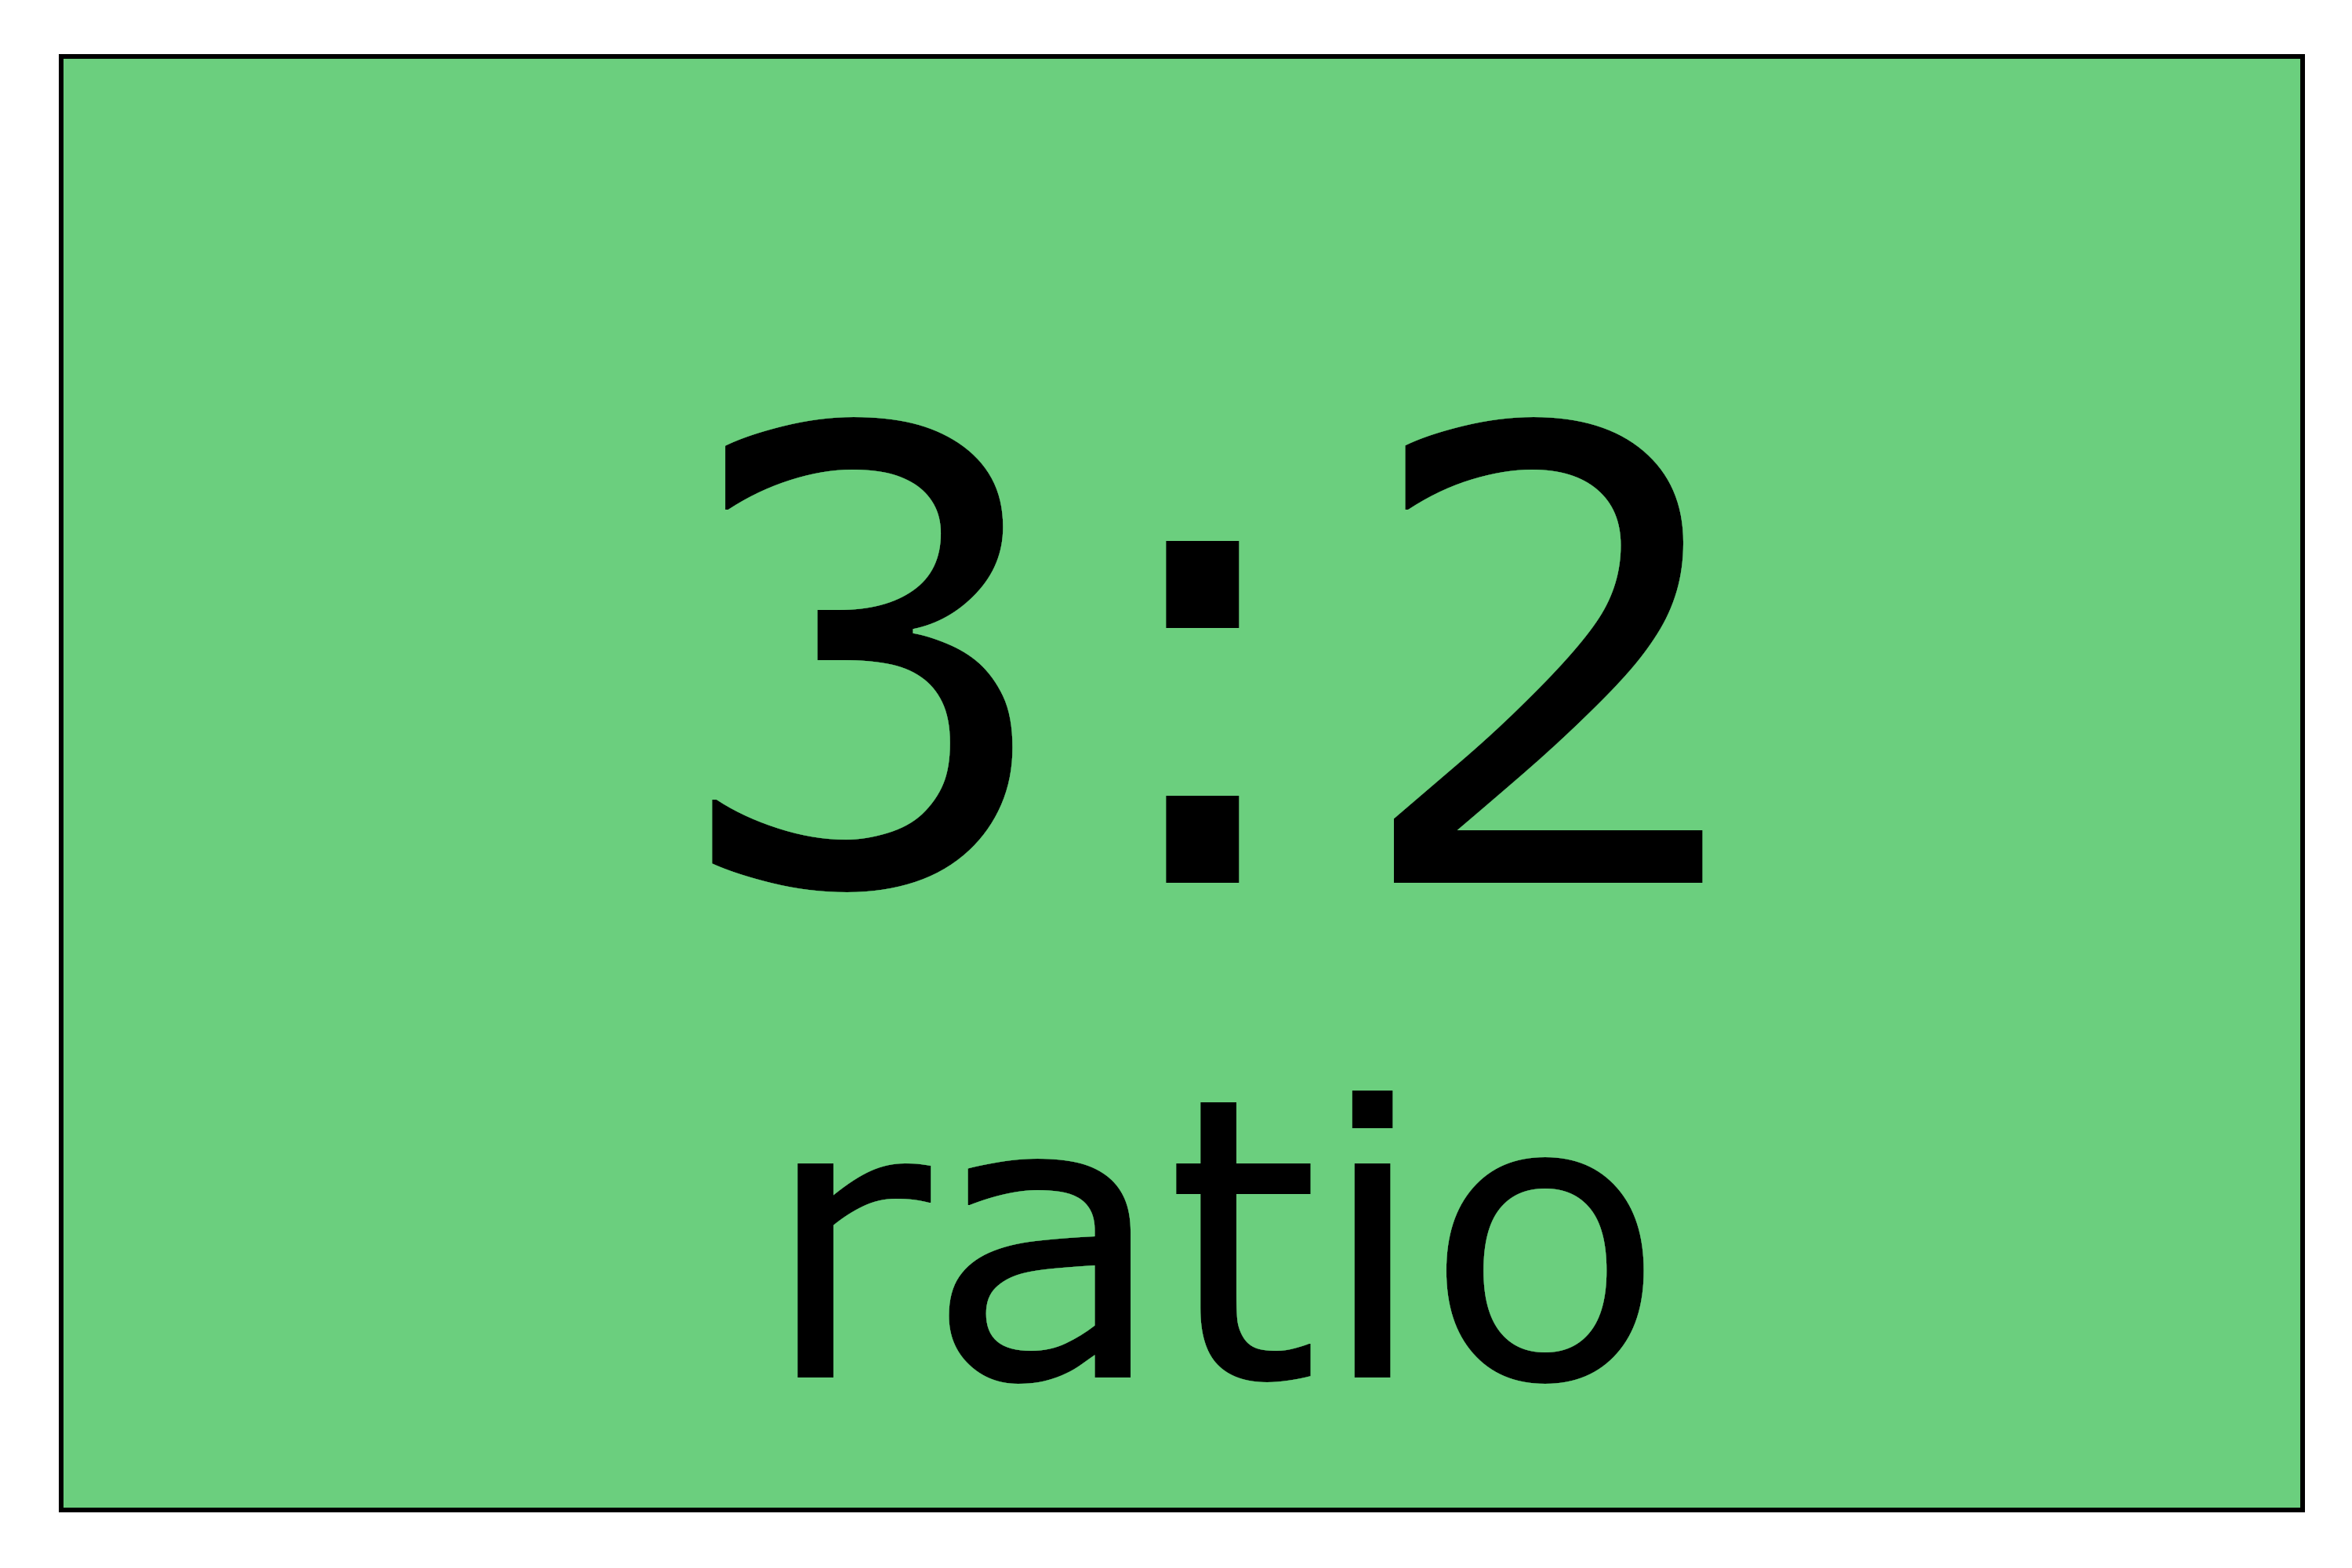 expression of the ratio 3:2 showing what a ratio looks like